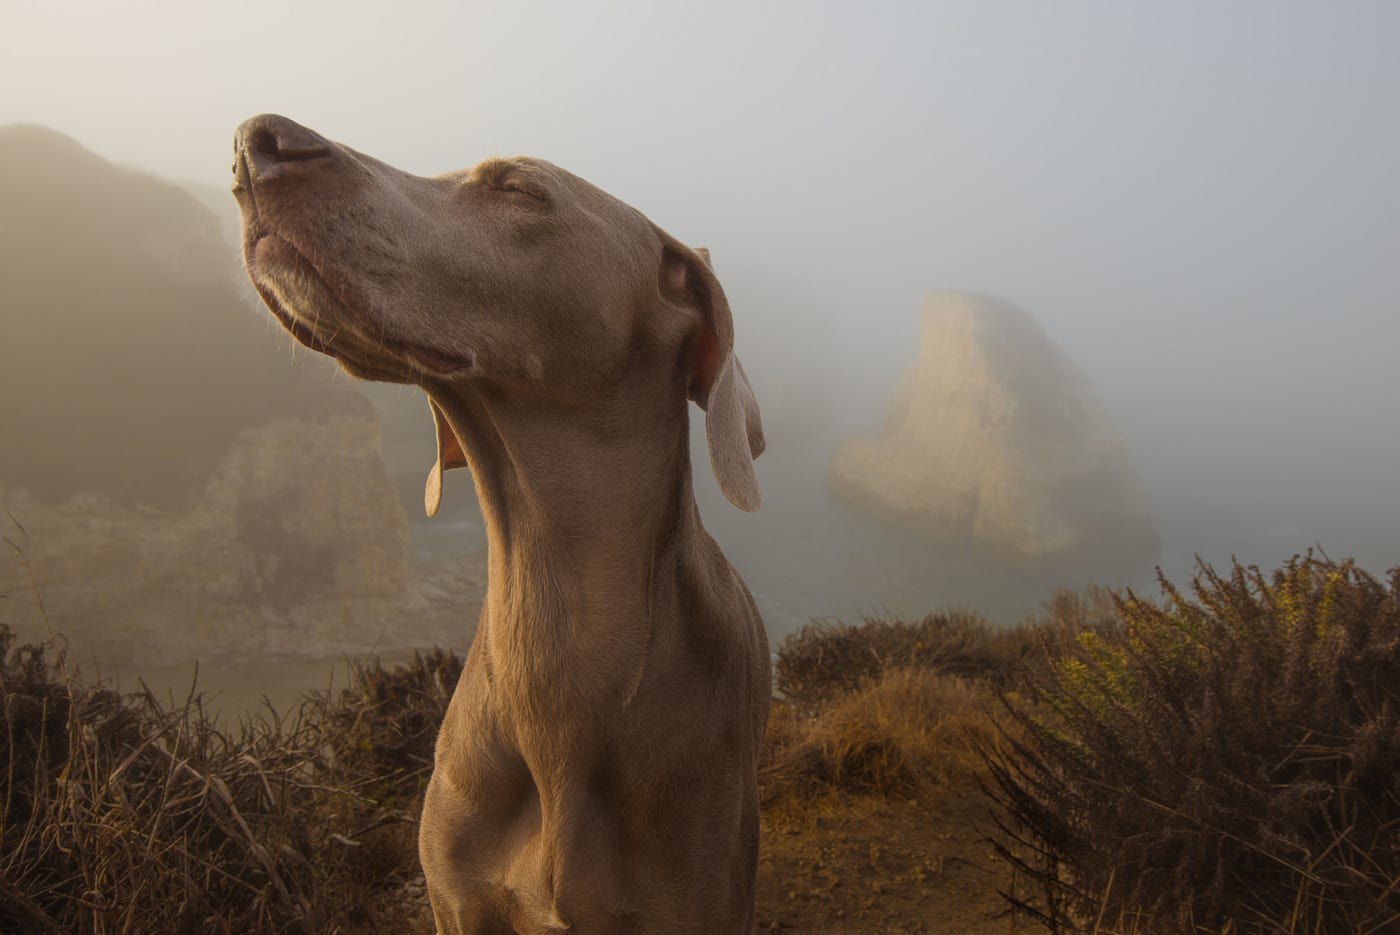 Vizsla dog, brown and medium-sized, point his nose to the upper left corner of the image. Mountains in the background, blurry.